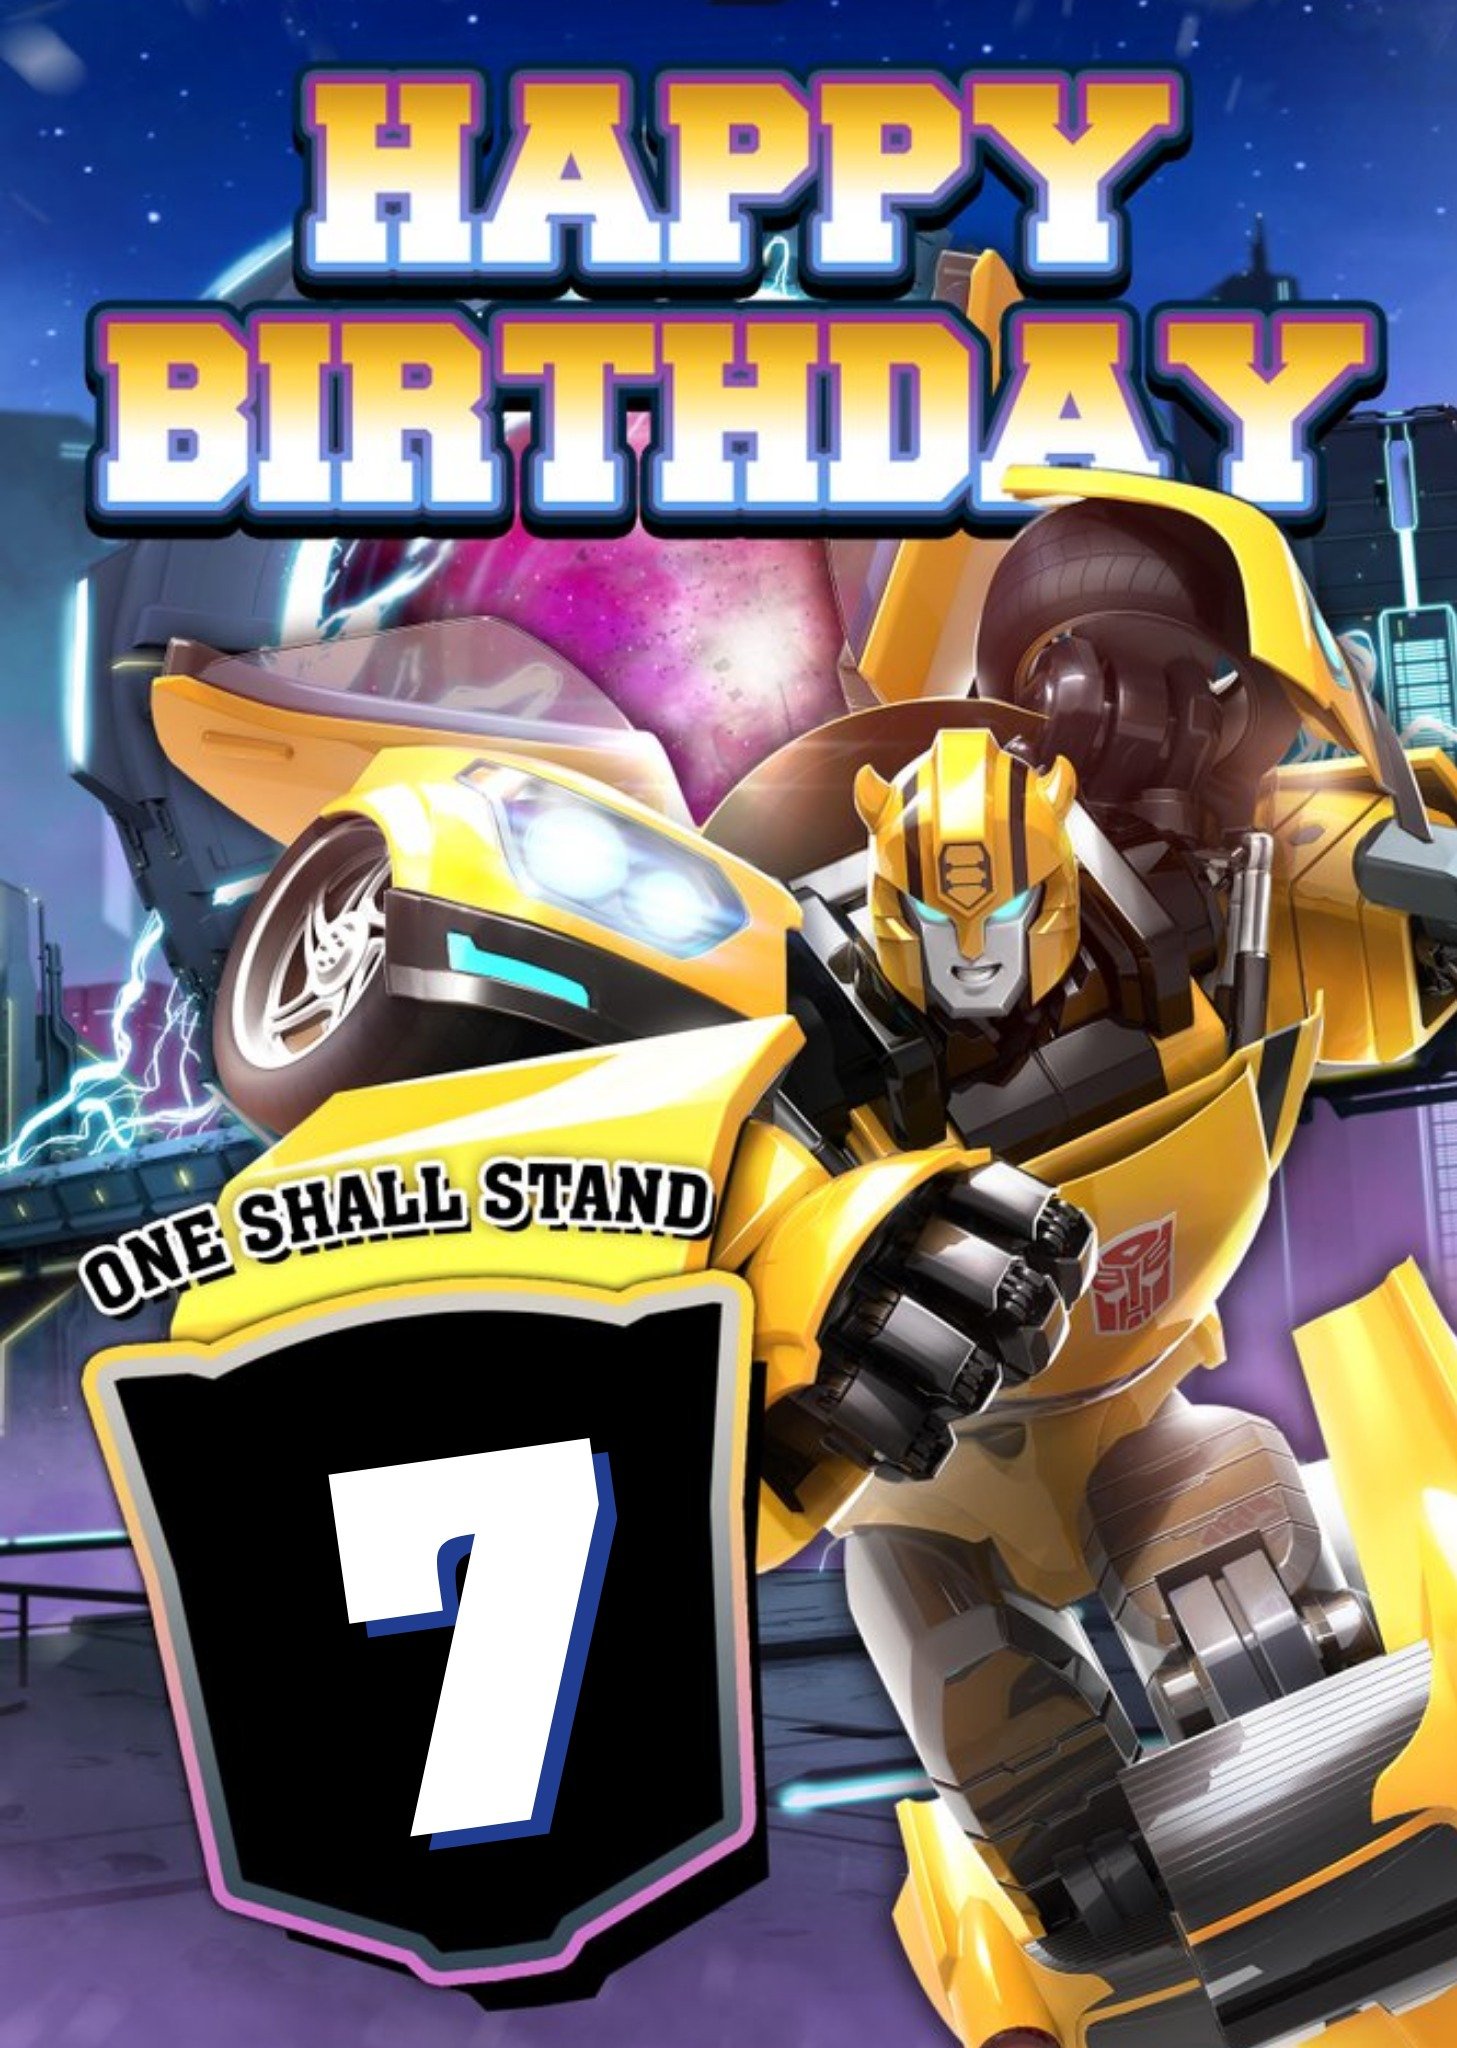 Transformers One Shall Stand Personalised Age Birthday Card Ecard